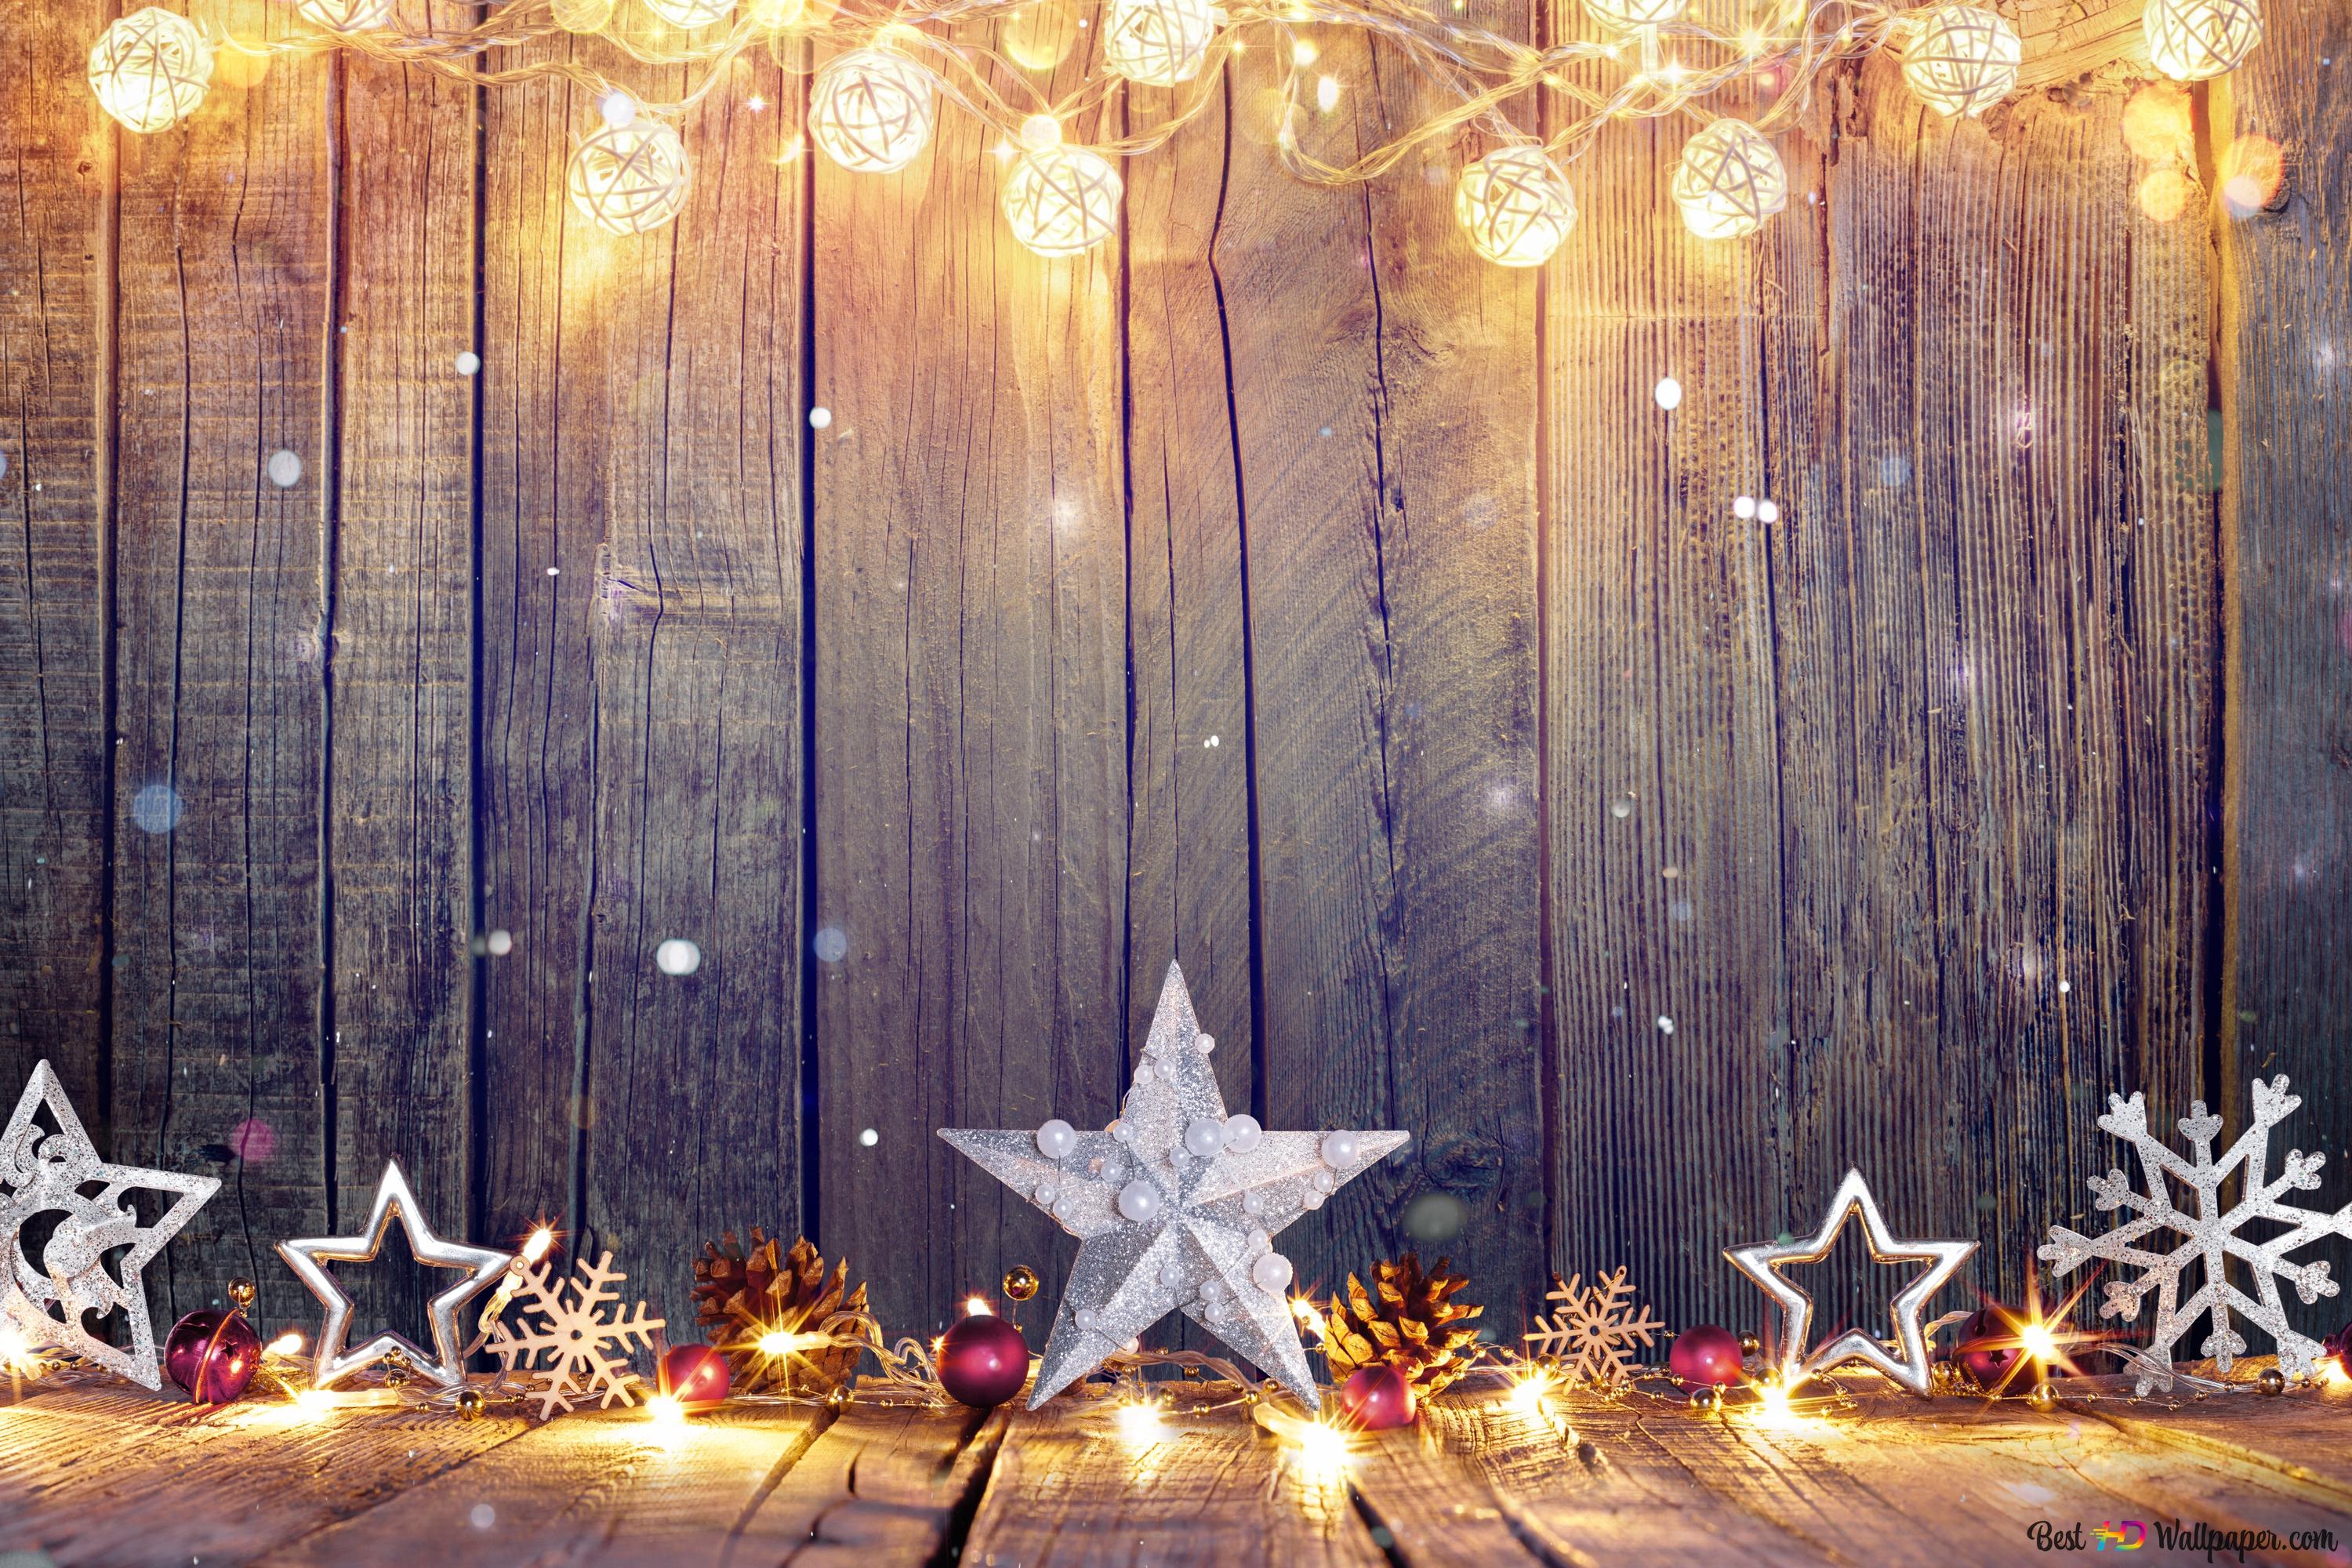 Christmas lights on a wooden background - Christmas lights